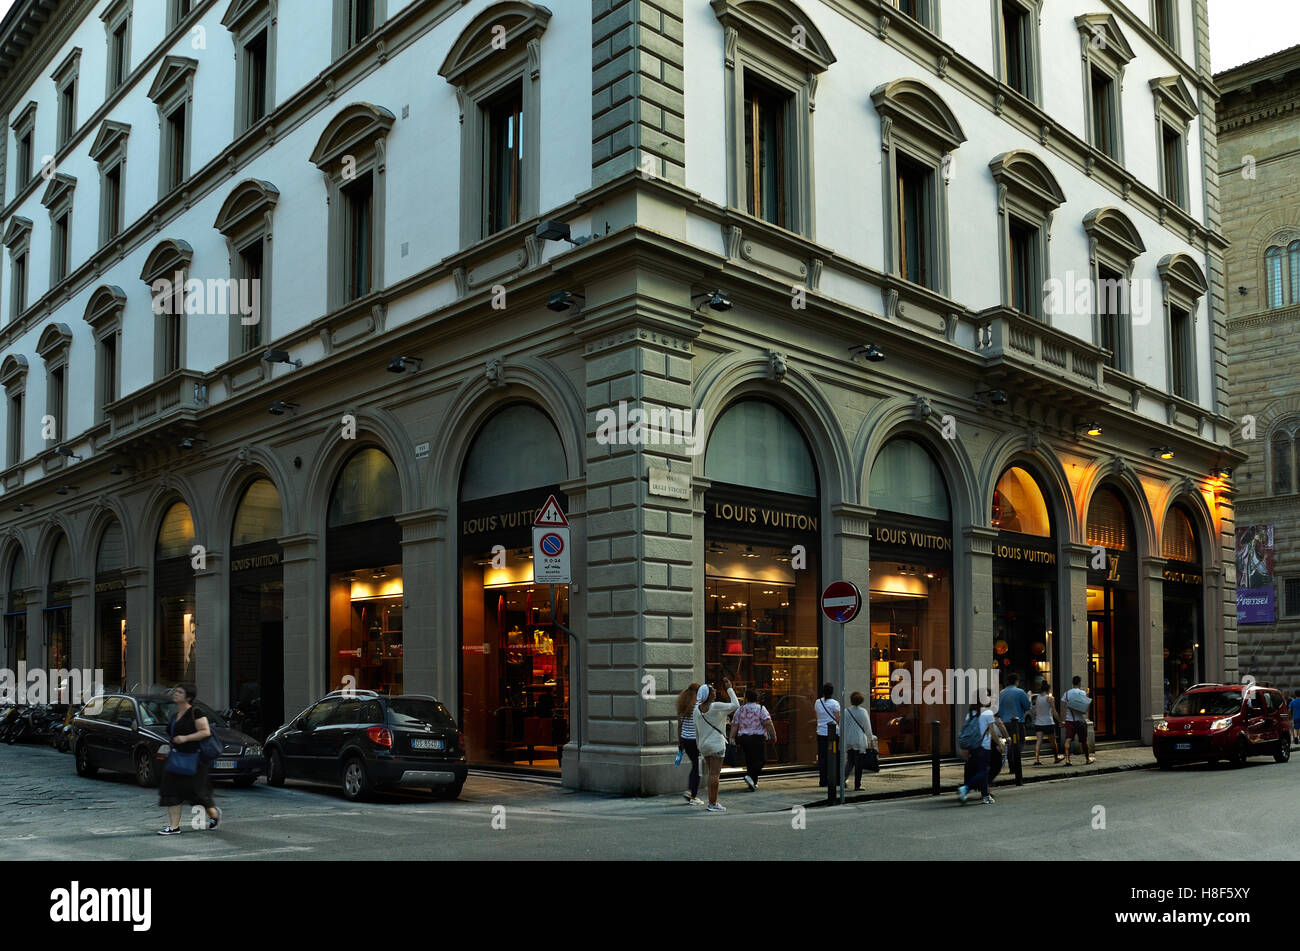 louis #vuitton #firenze #florence #italy #luxury #travel #shopping